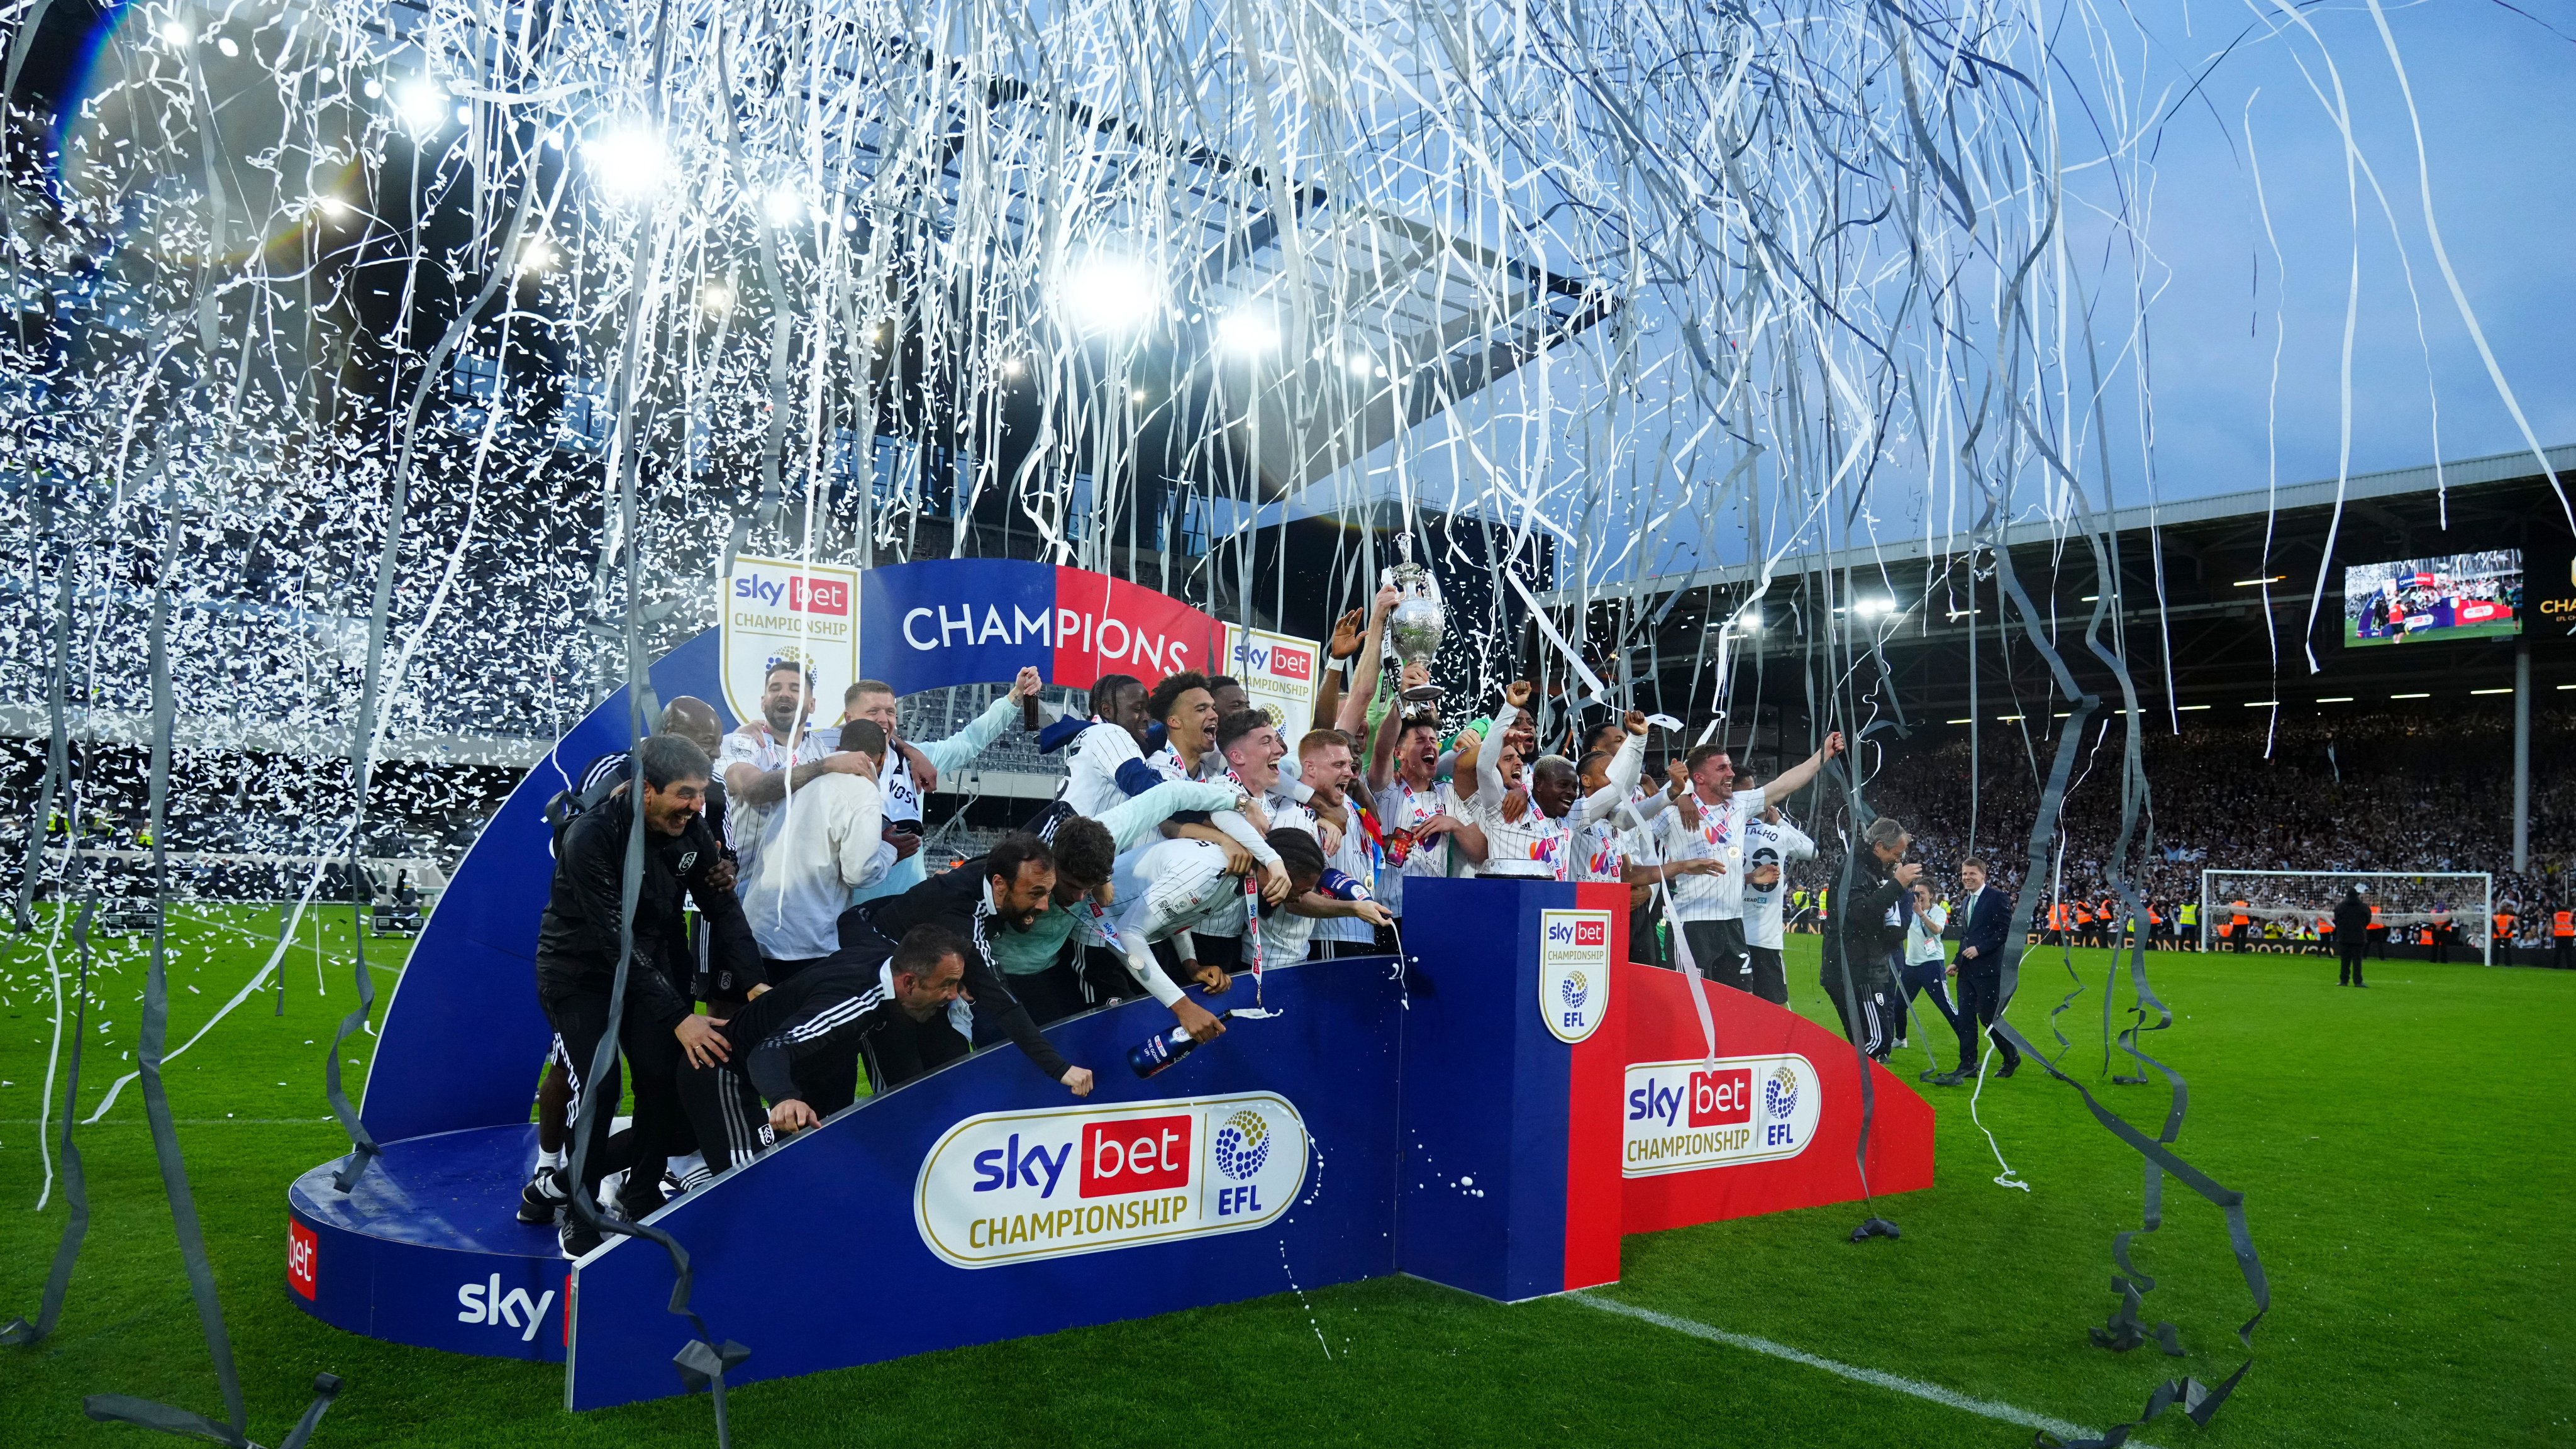 Fulham’s history making Championship title may mean nothing if the disparity issue isn’t solved